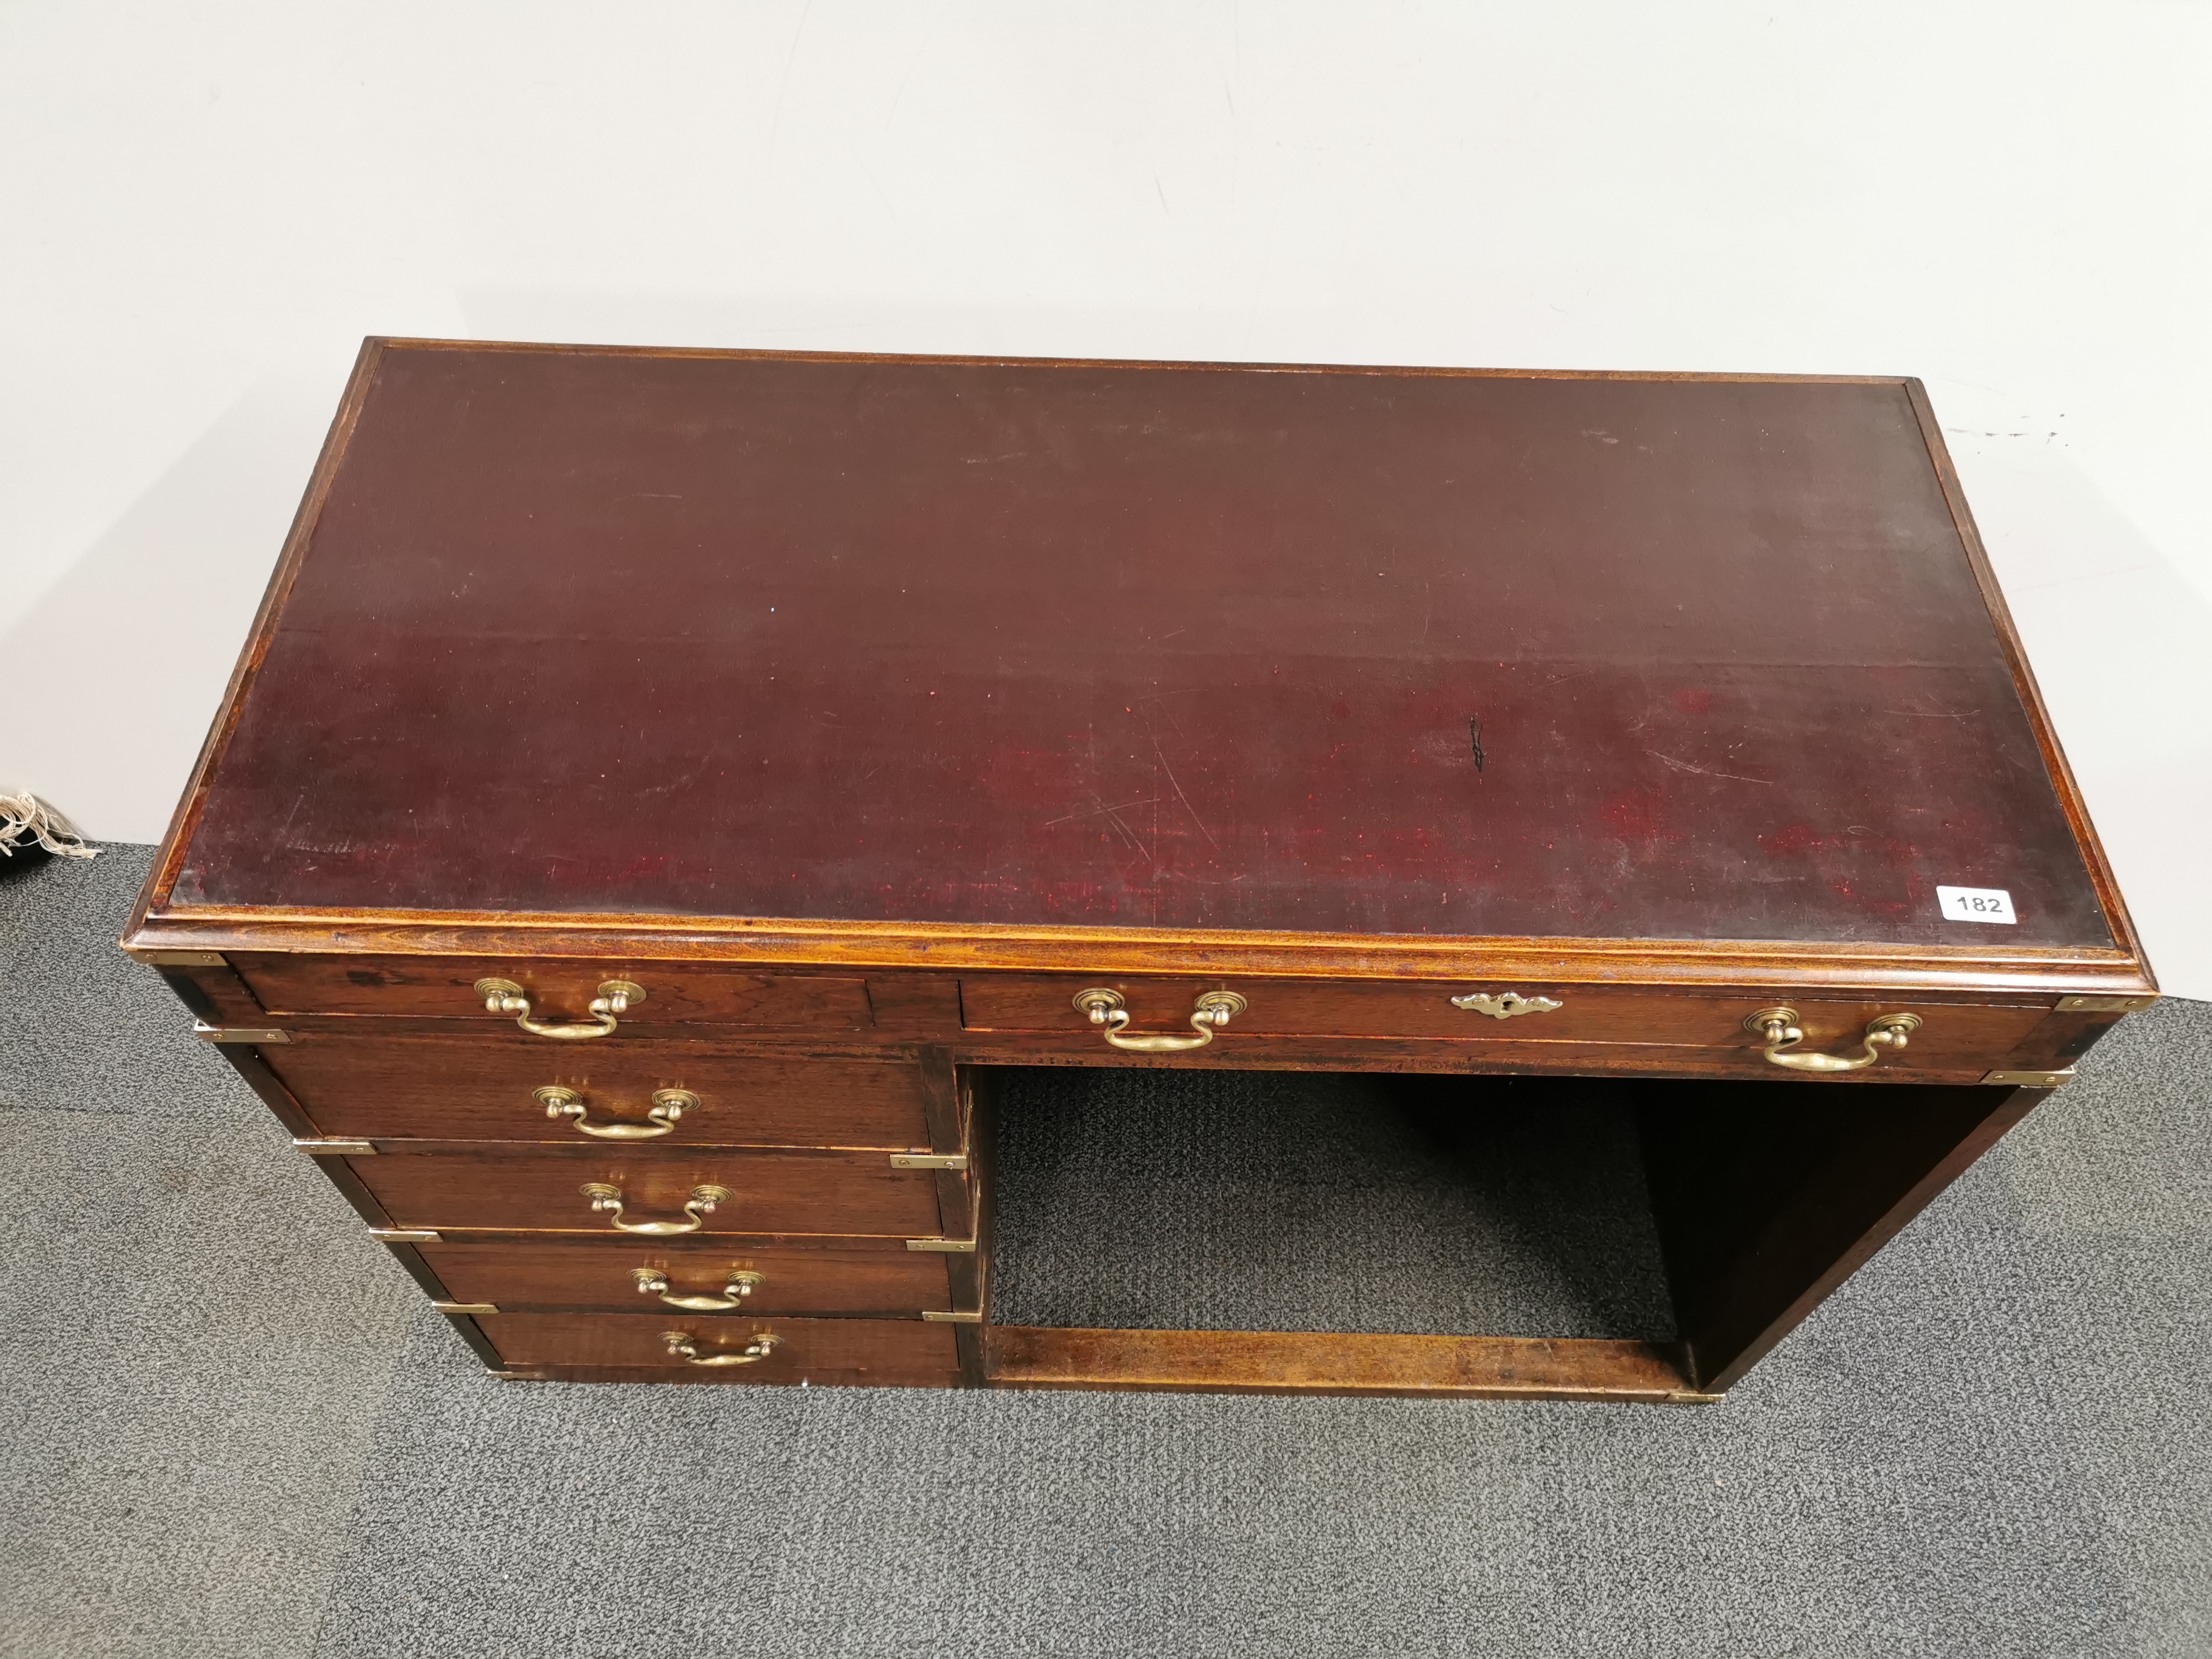 A military style brass mounted desk, 109 x 50 x 77cm. - Image 2 of 3